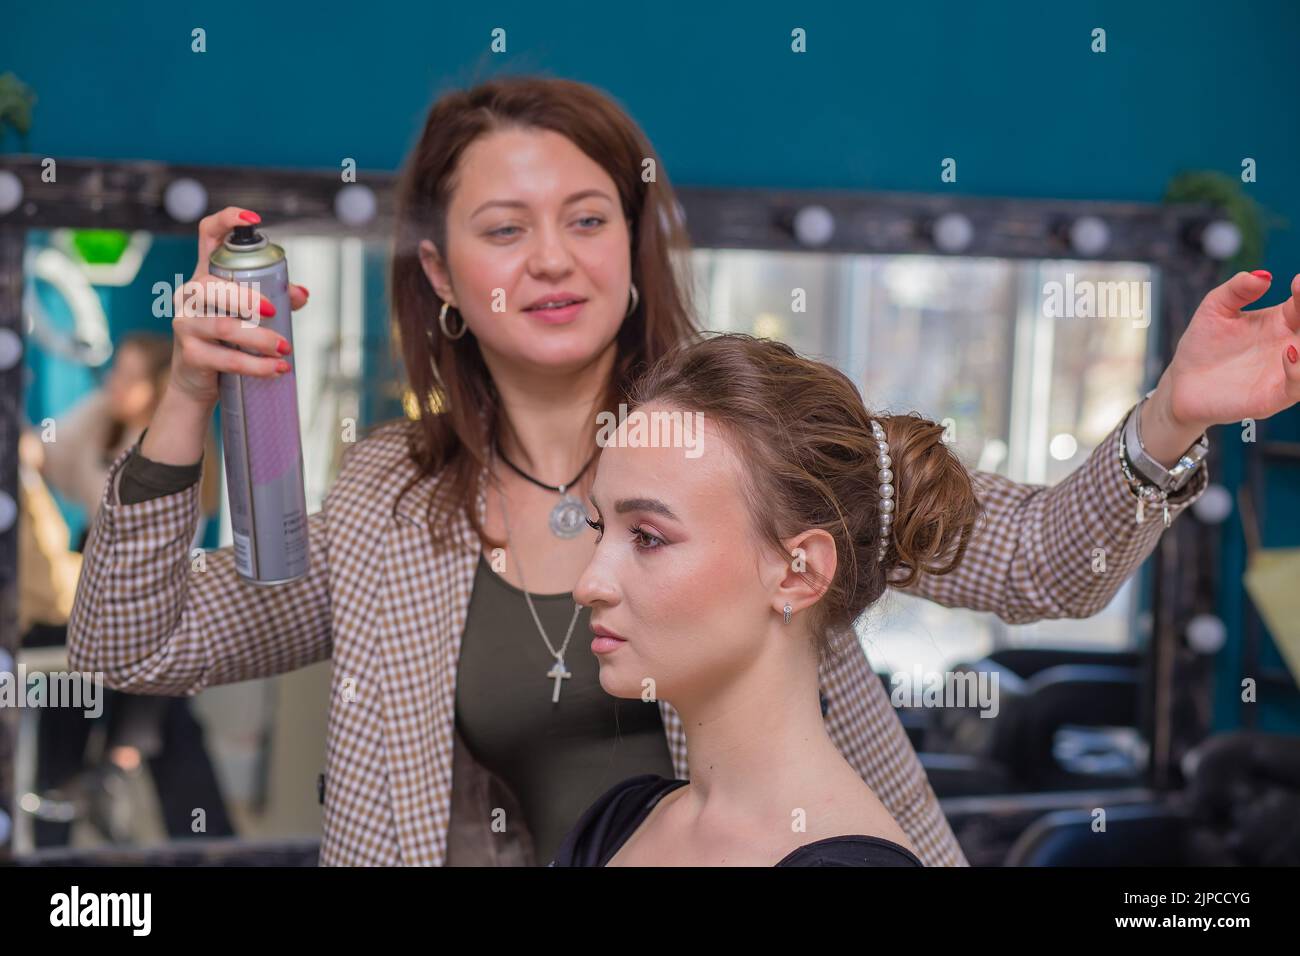 A young woman master with a smile sprinkles varnish on the client's hair. The hairdresser makes a hairstyle for a young woman. Barber shop, business concept. Beauty salon, hair care. Stock Photo